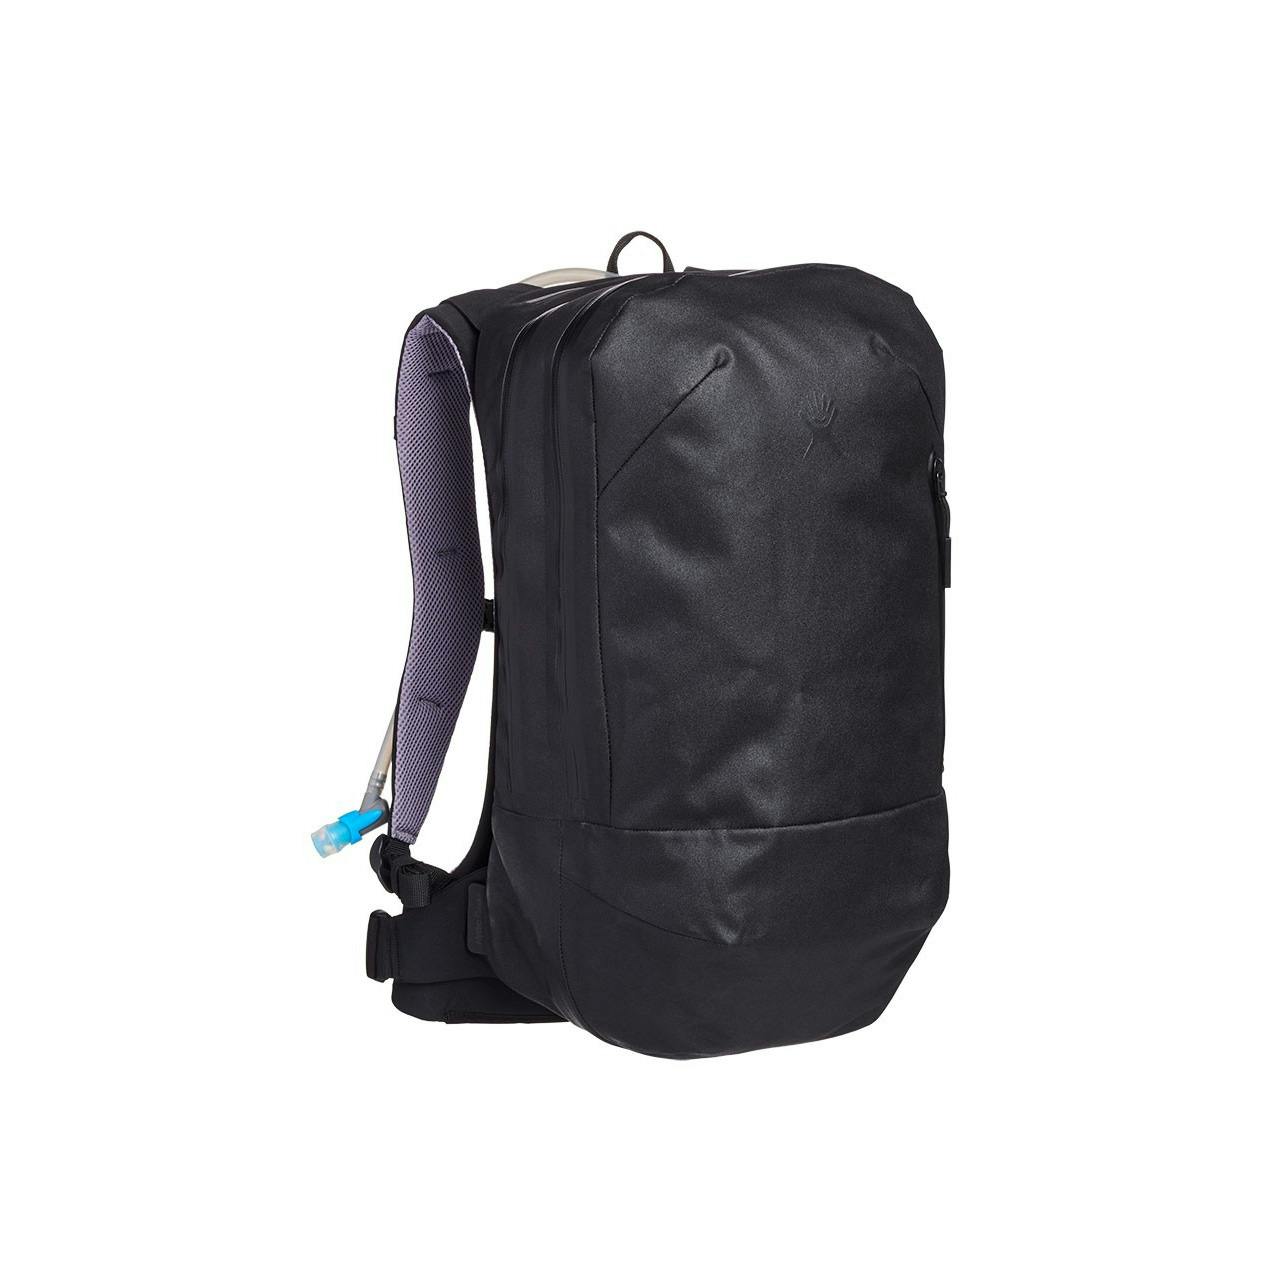 https://activejunky-cdn.s3.amazonaws.com/aj-content/20l-hydration-pack-black-angledview1_3.jpg